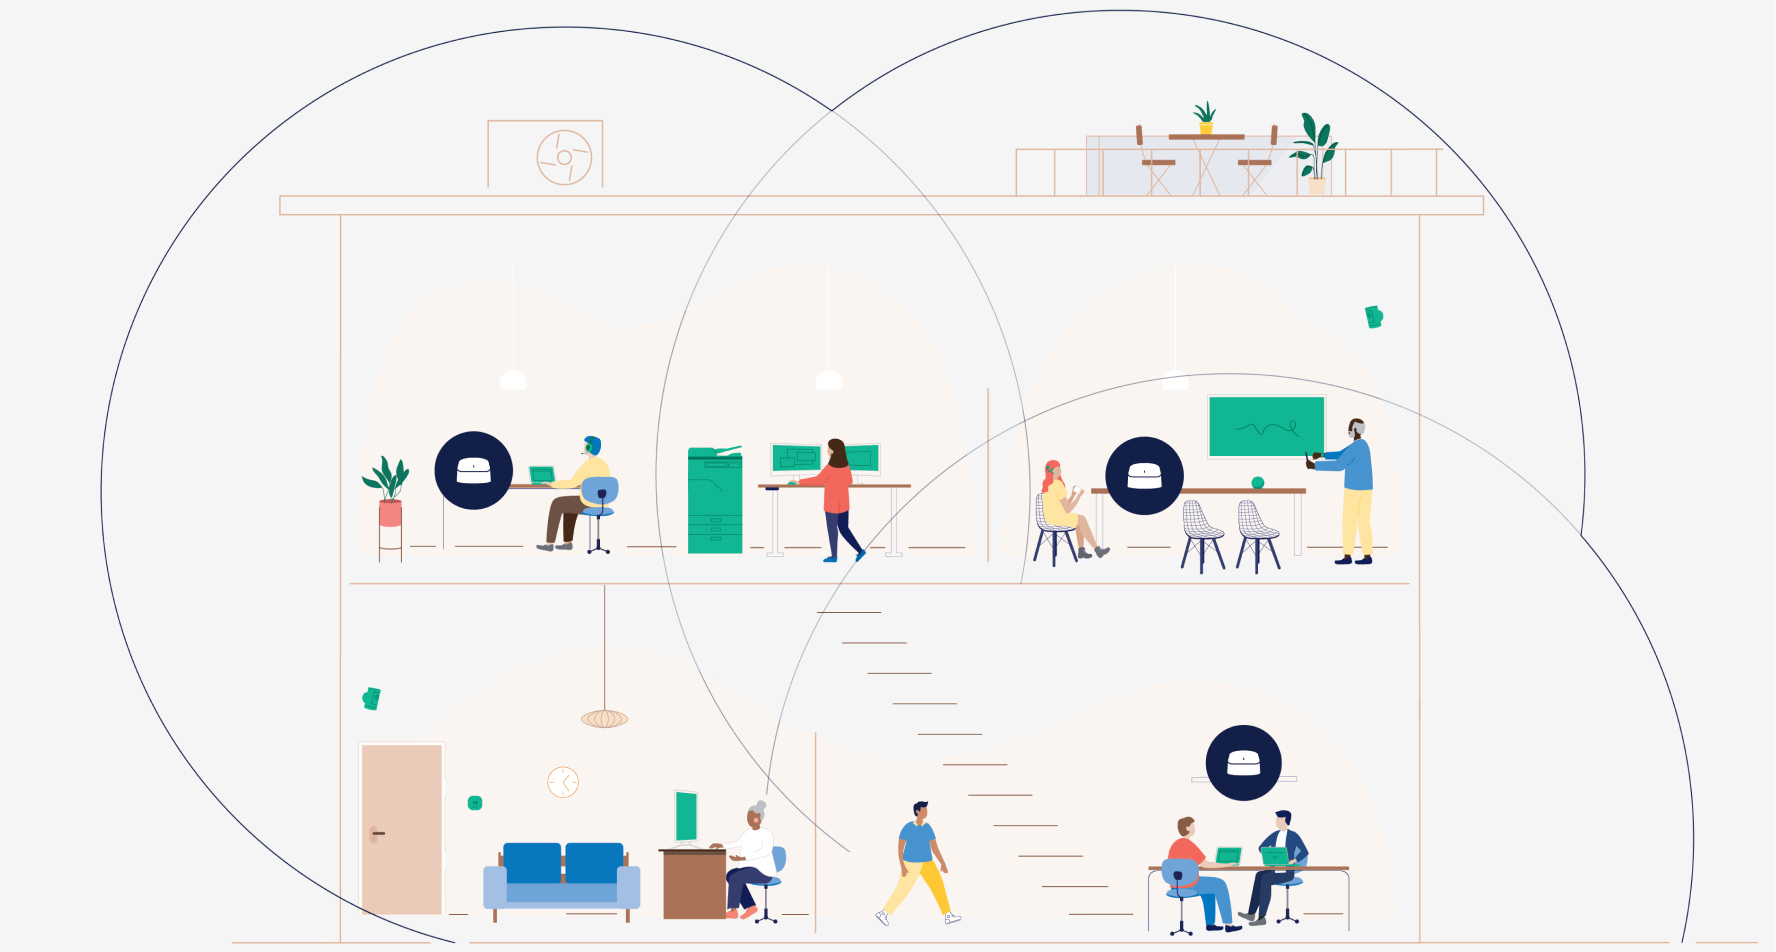 Illustration of people collaborating in an office space